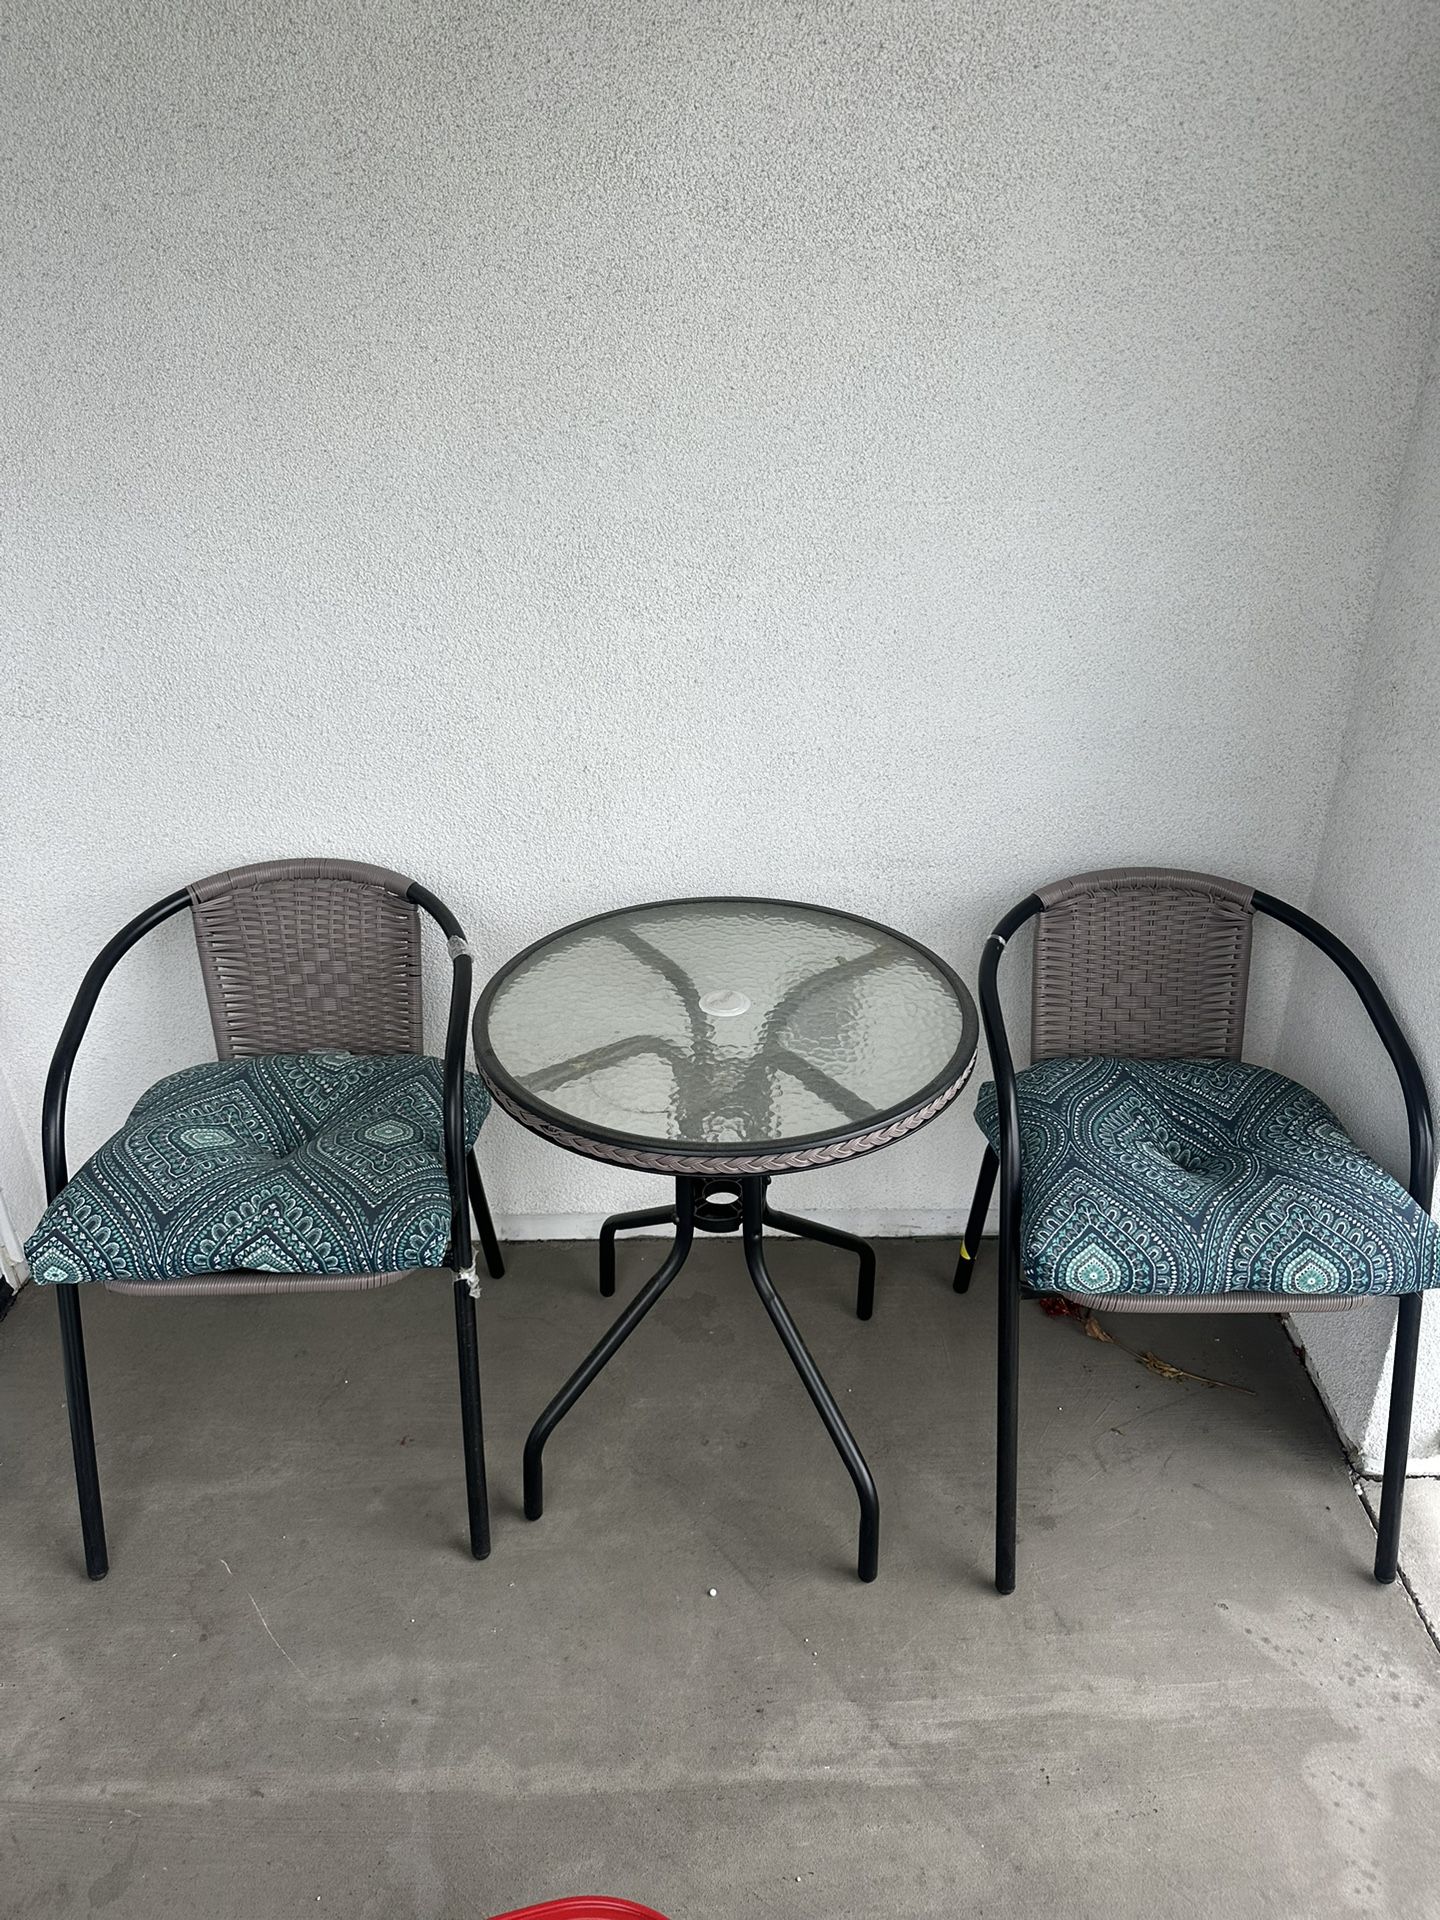 Patio table / Chair 